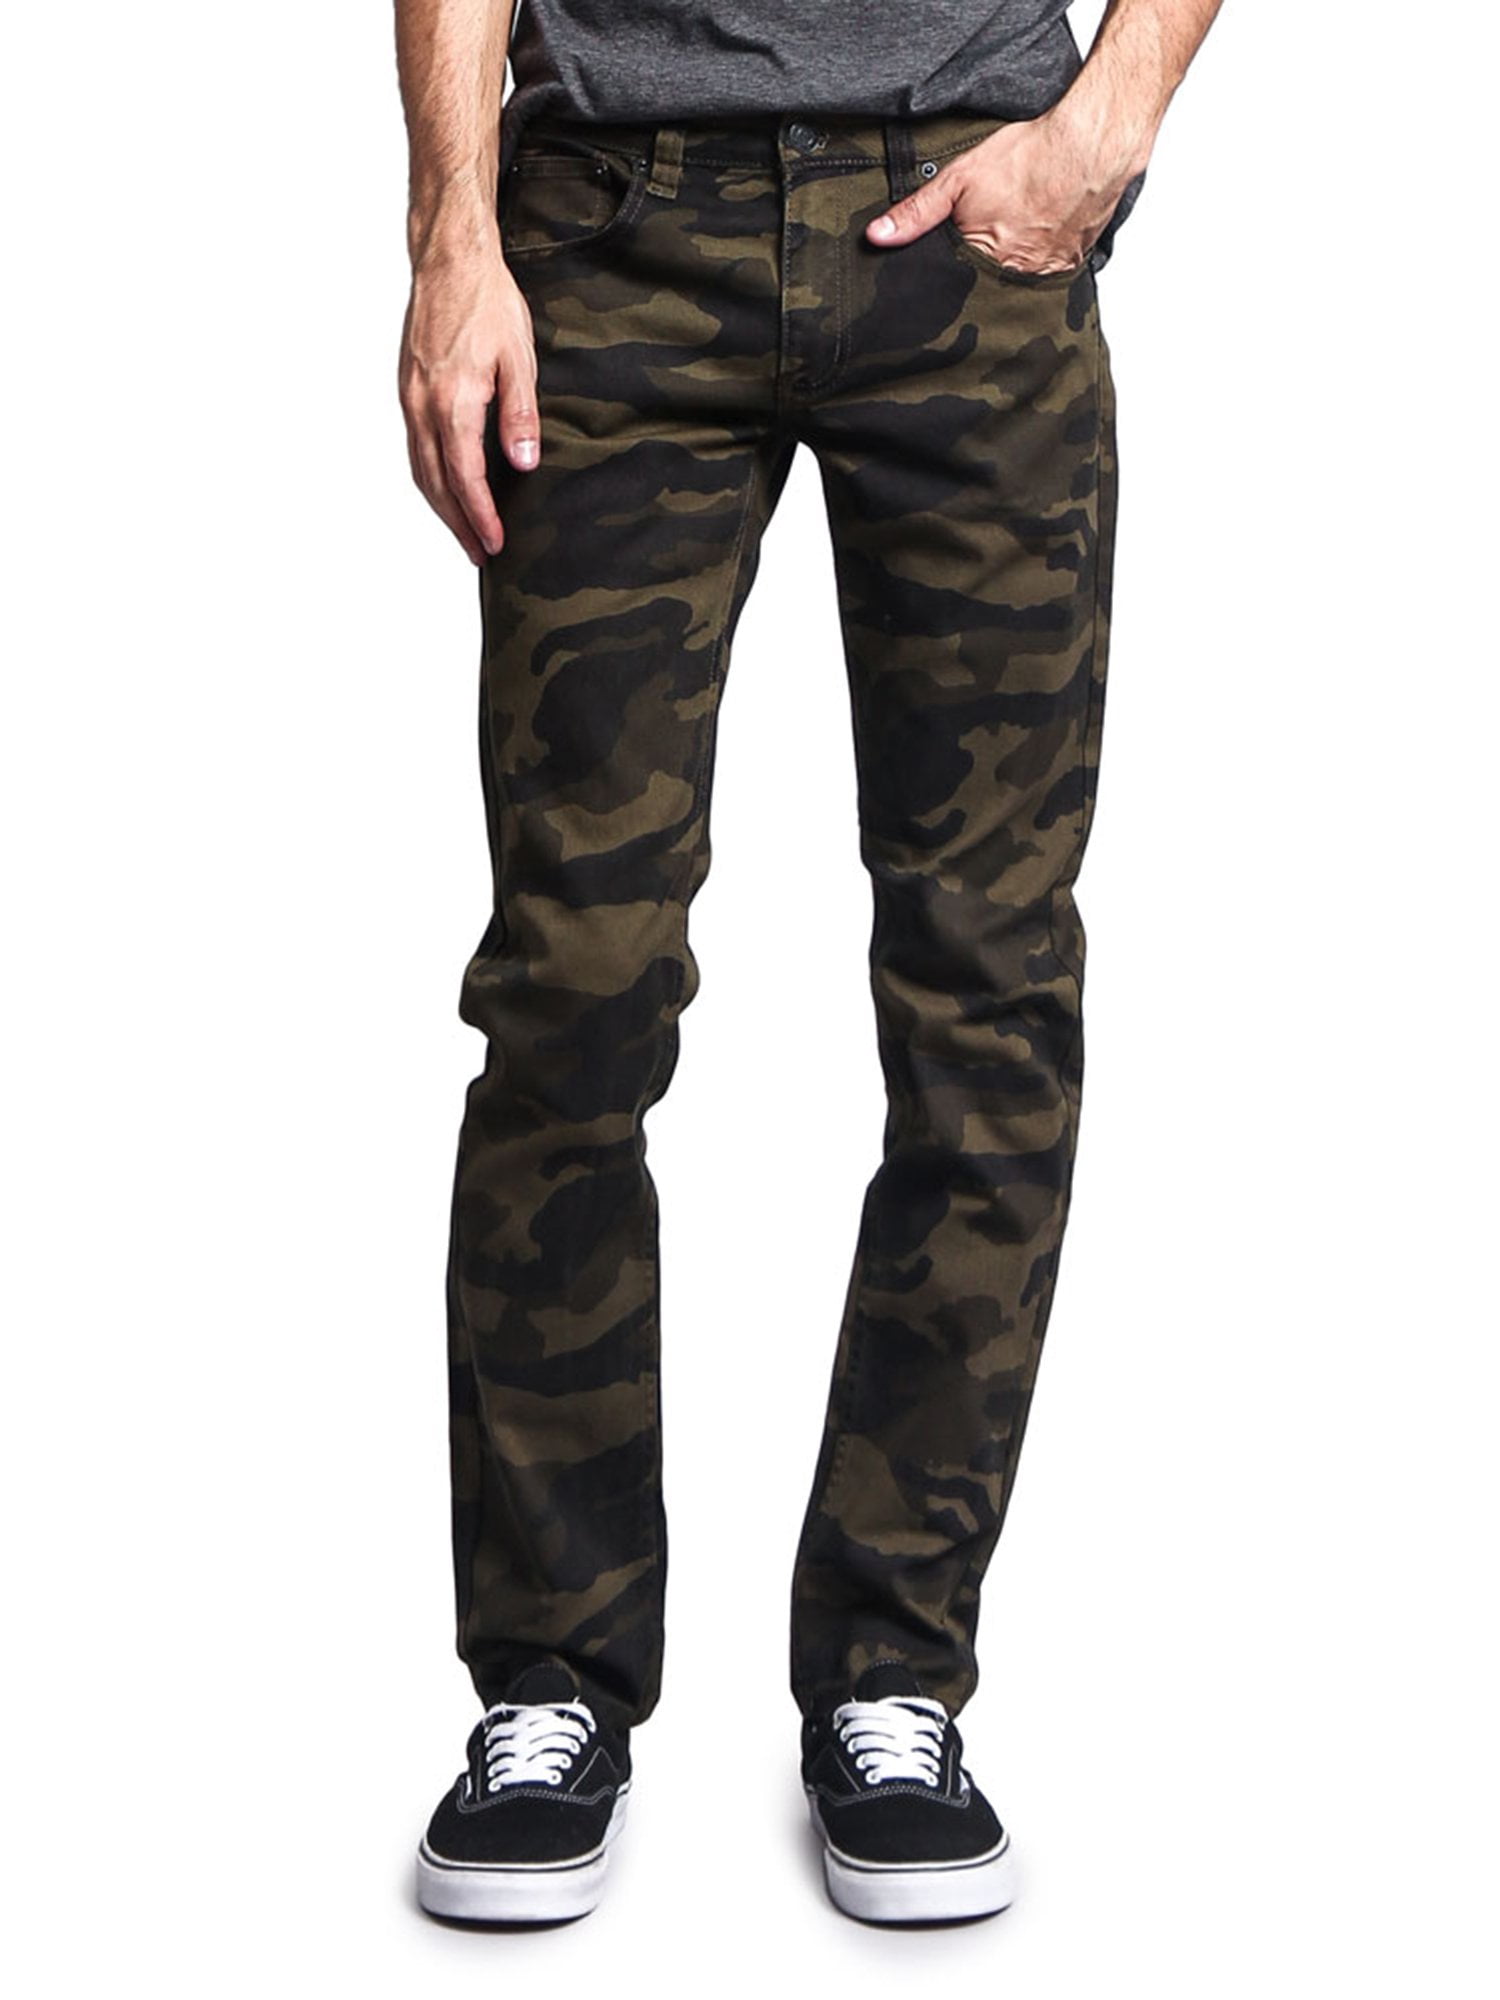 Victorious Mens Camouflage Skinny Fit Jeans AR169 - OLIVE/CAMO - - Walmart.com